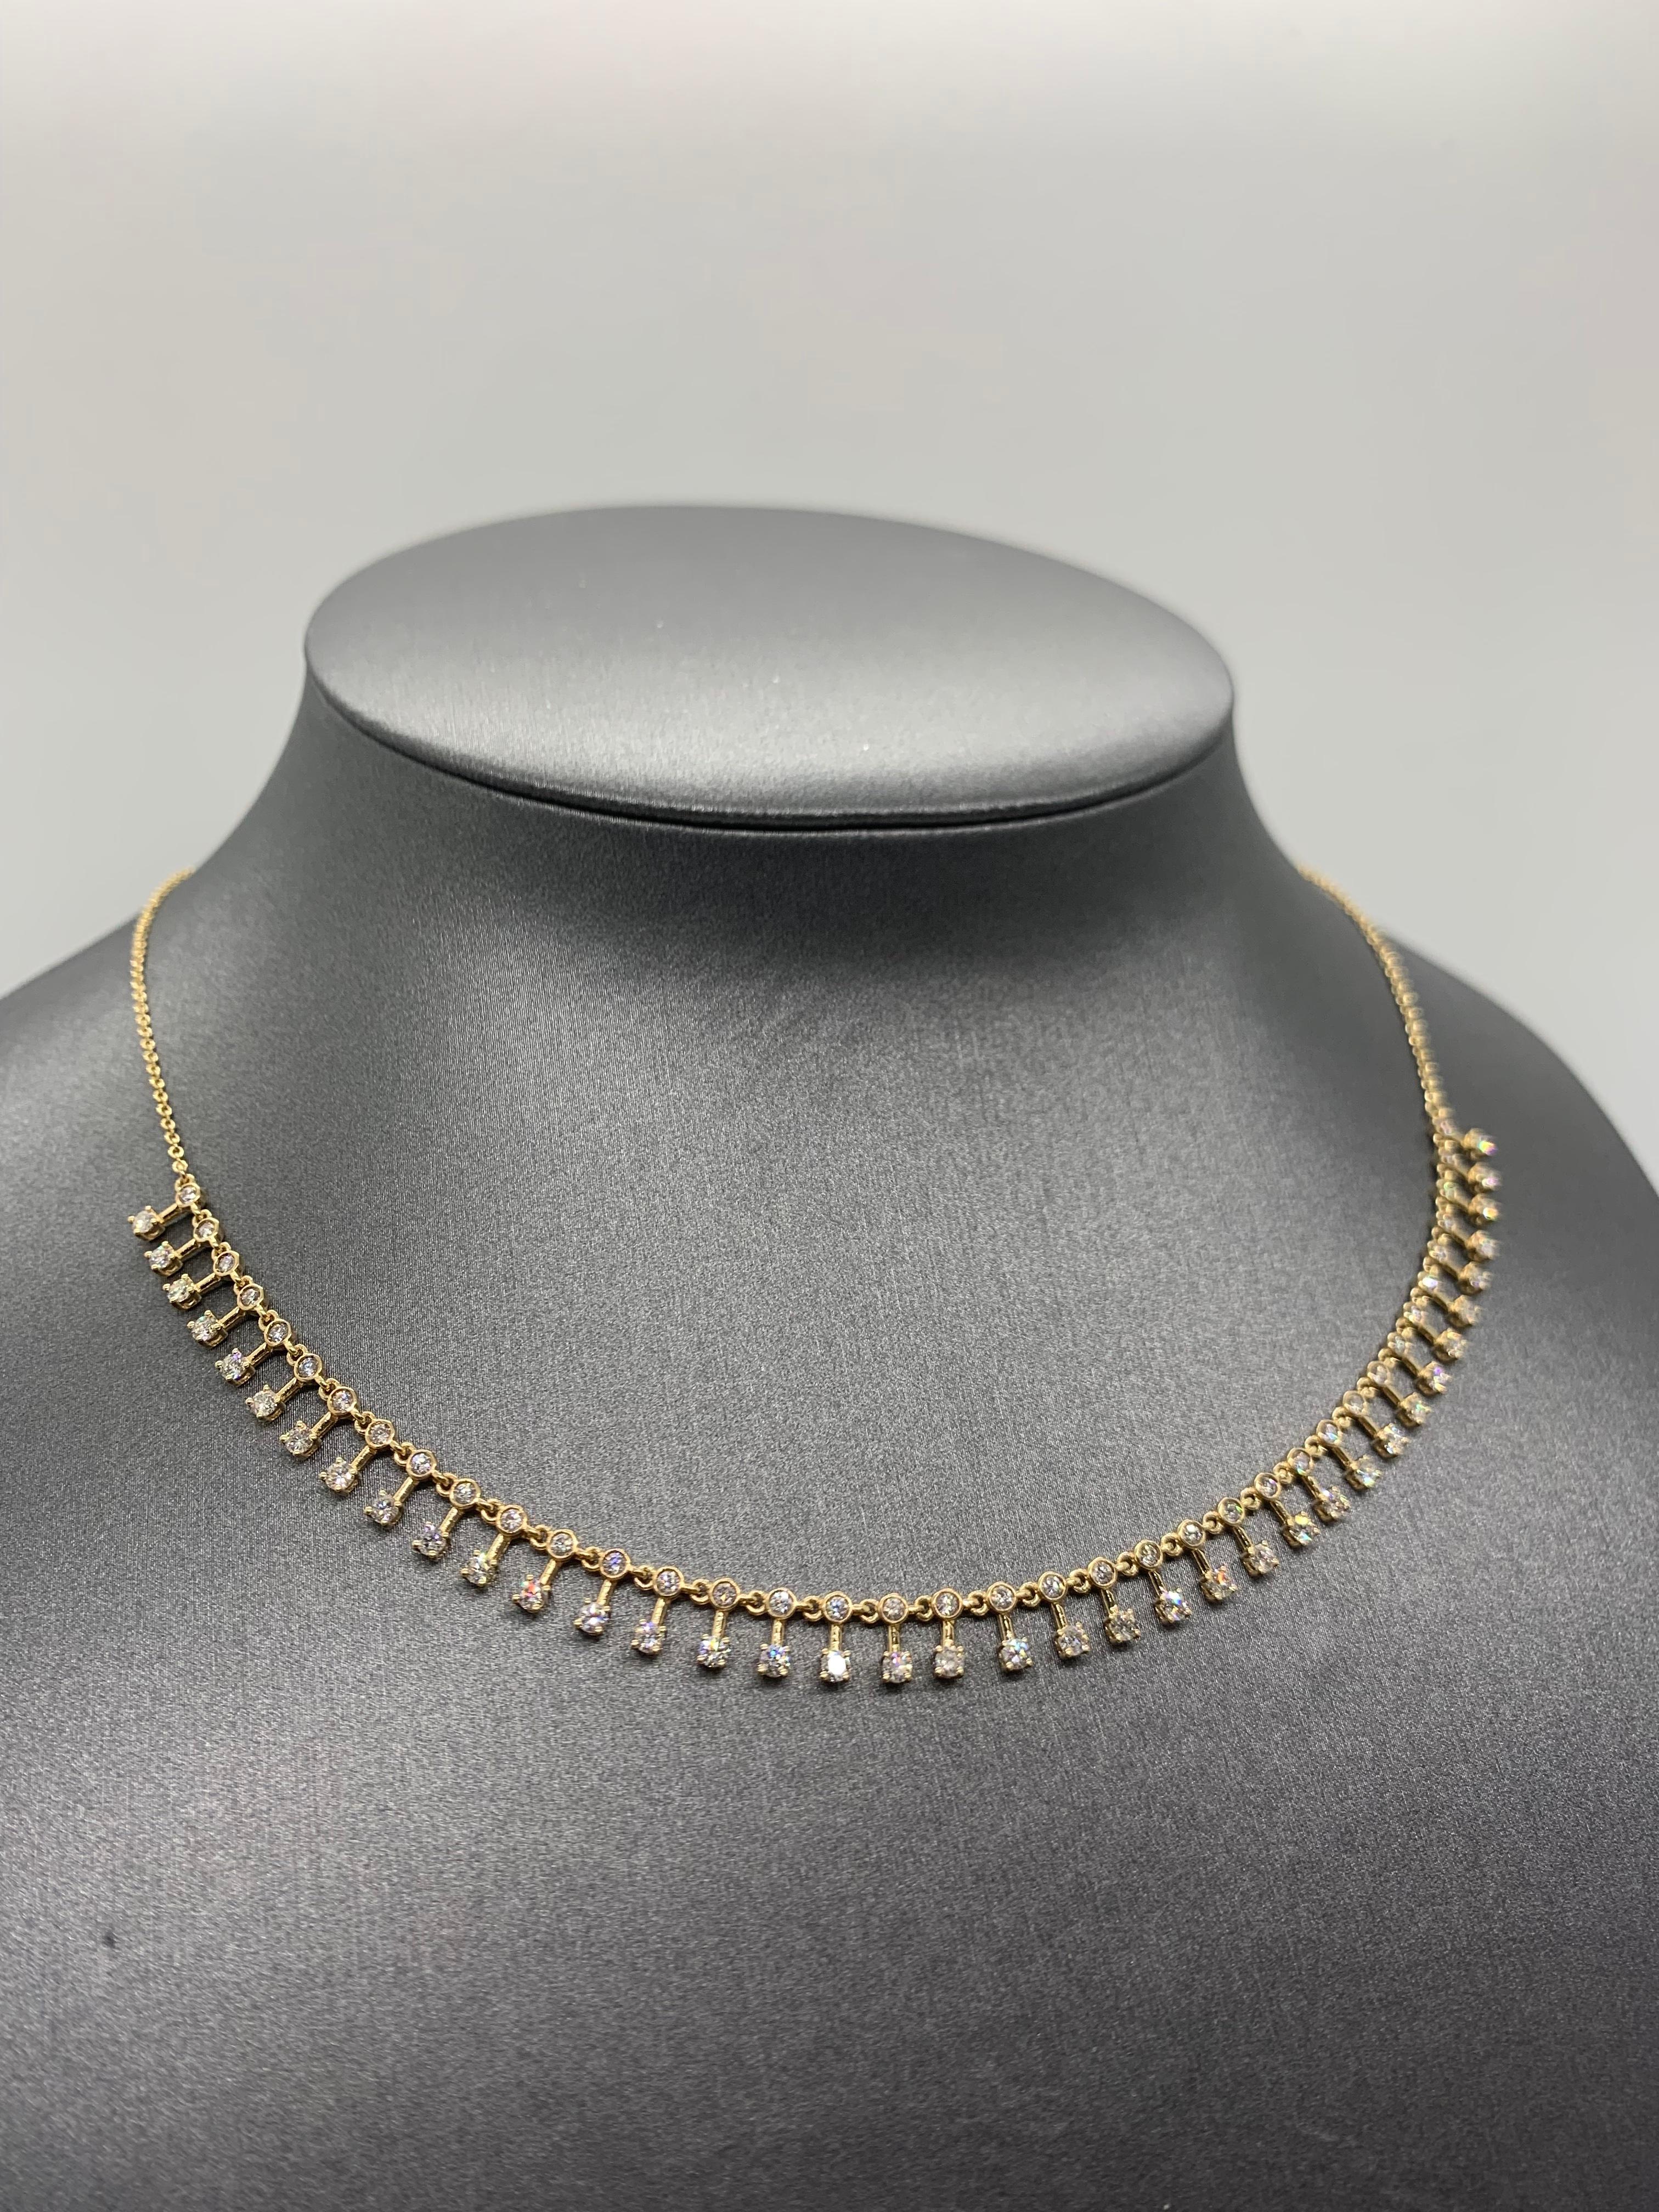 Patterned Diamond Necklace in 18K Yellow Gold In New Condition For Sale In Los Angeles, CA